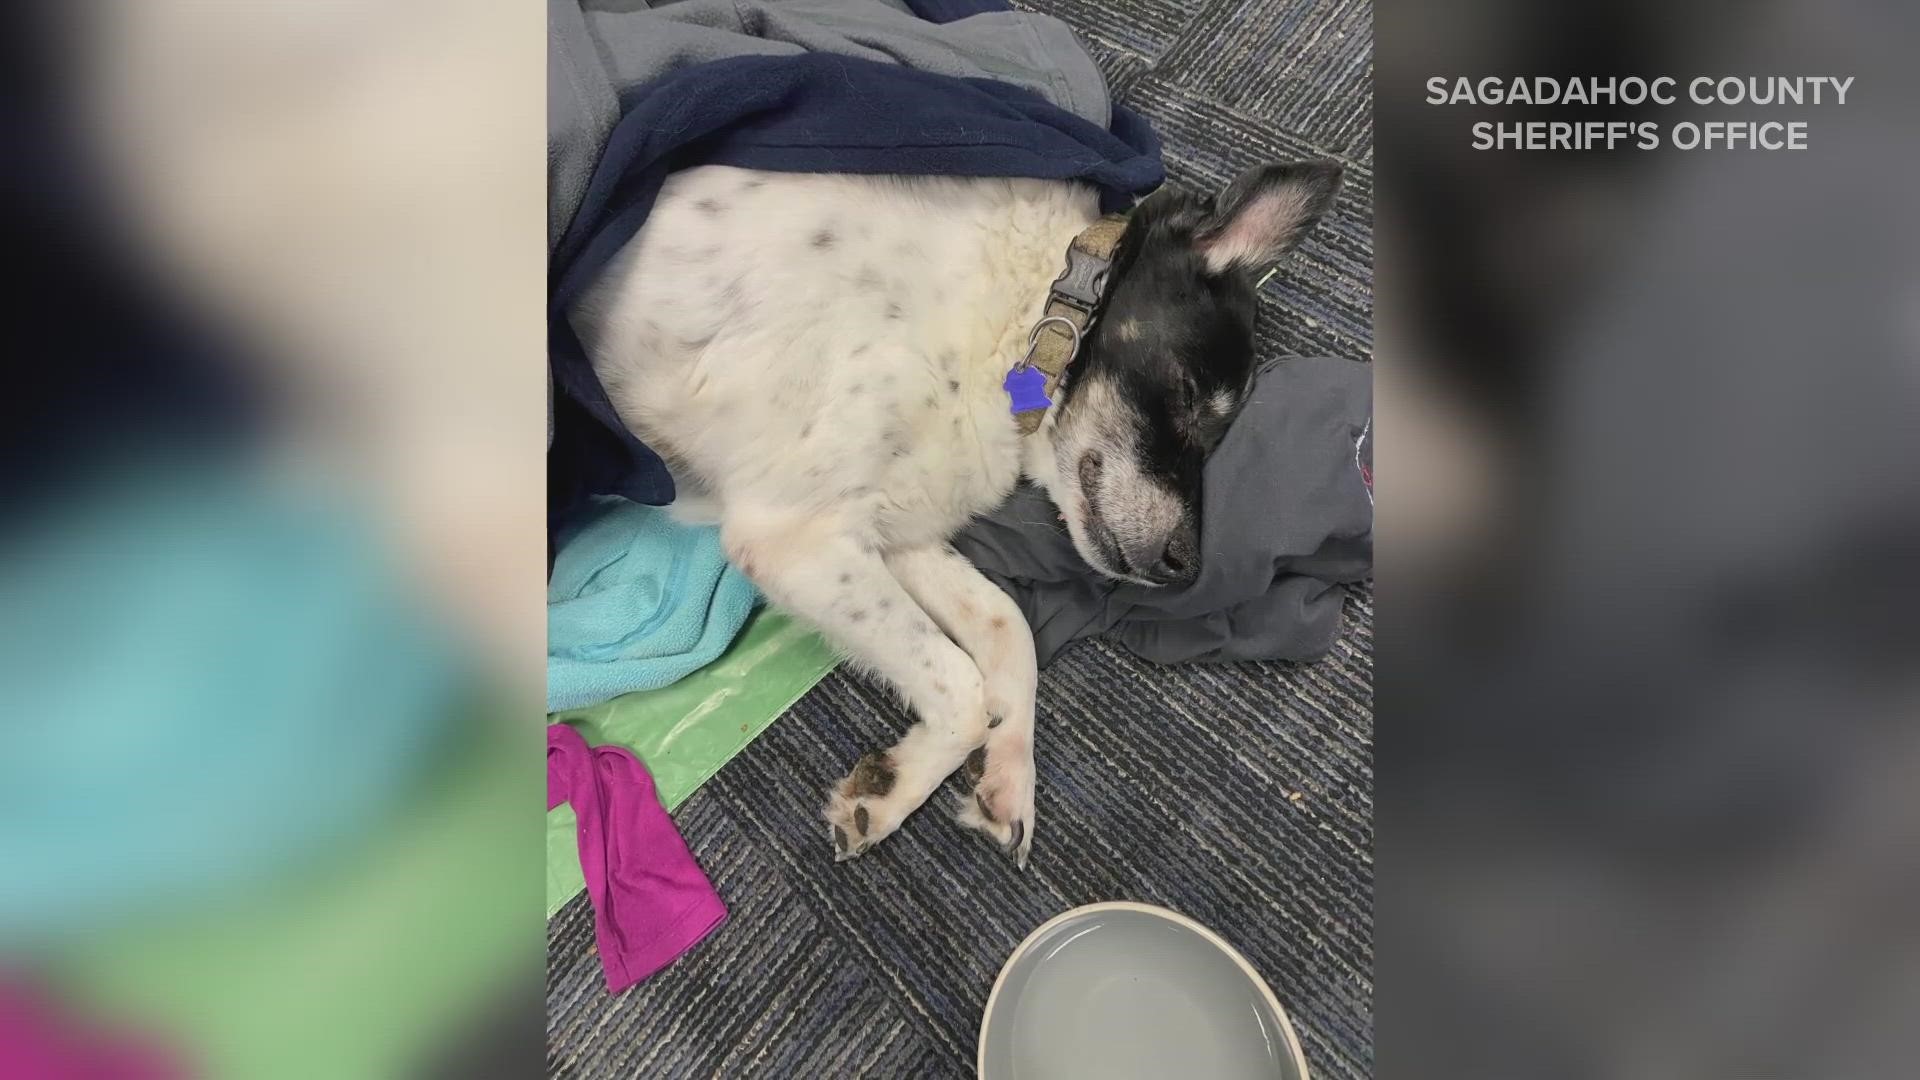 The dog, at least 14 years old, was let out of its home around 9 p.m. on Friday and did not return. The owner stayed up all night worrying, officials said.